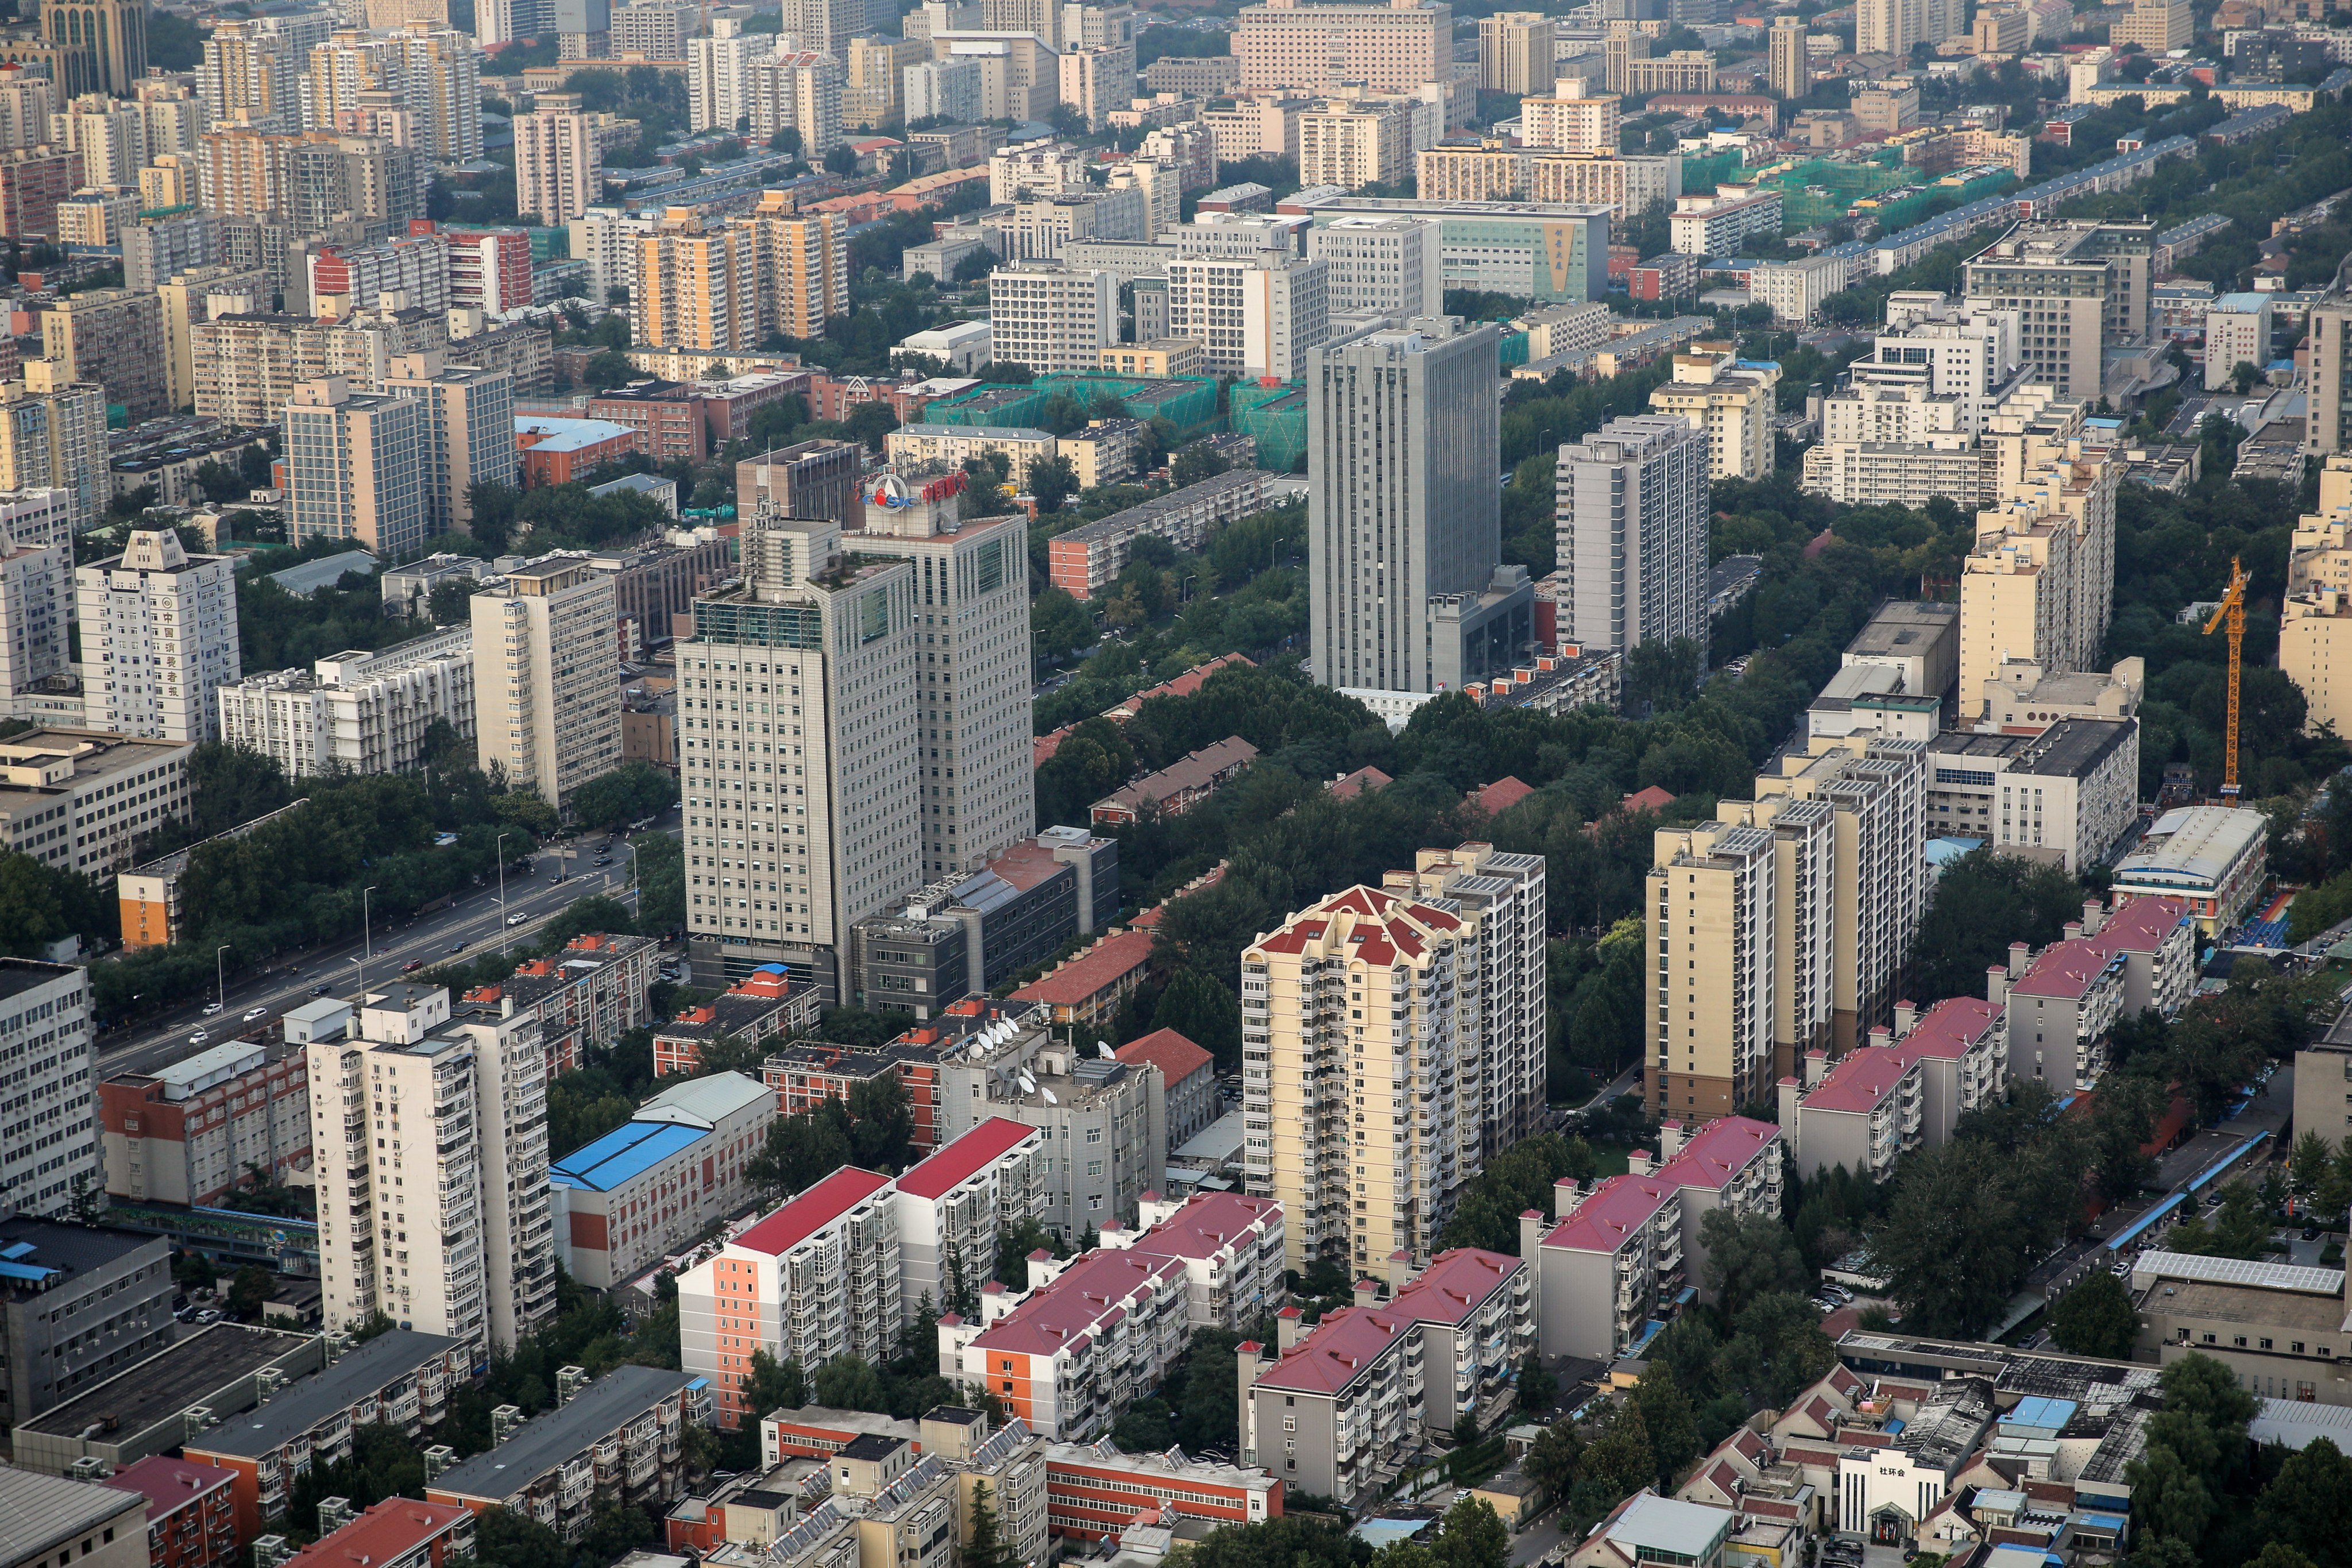 Residential buildings in Beijing. Borrowers who have taken out a first mortgage before August 31 this year qualify and will see an automatic cut in their monthly payments without having to apply for it, the banks say. Photo: EPA-EFE